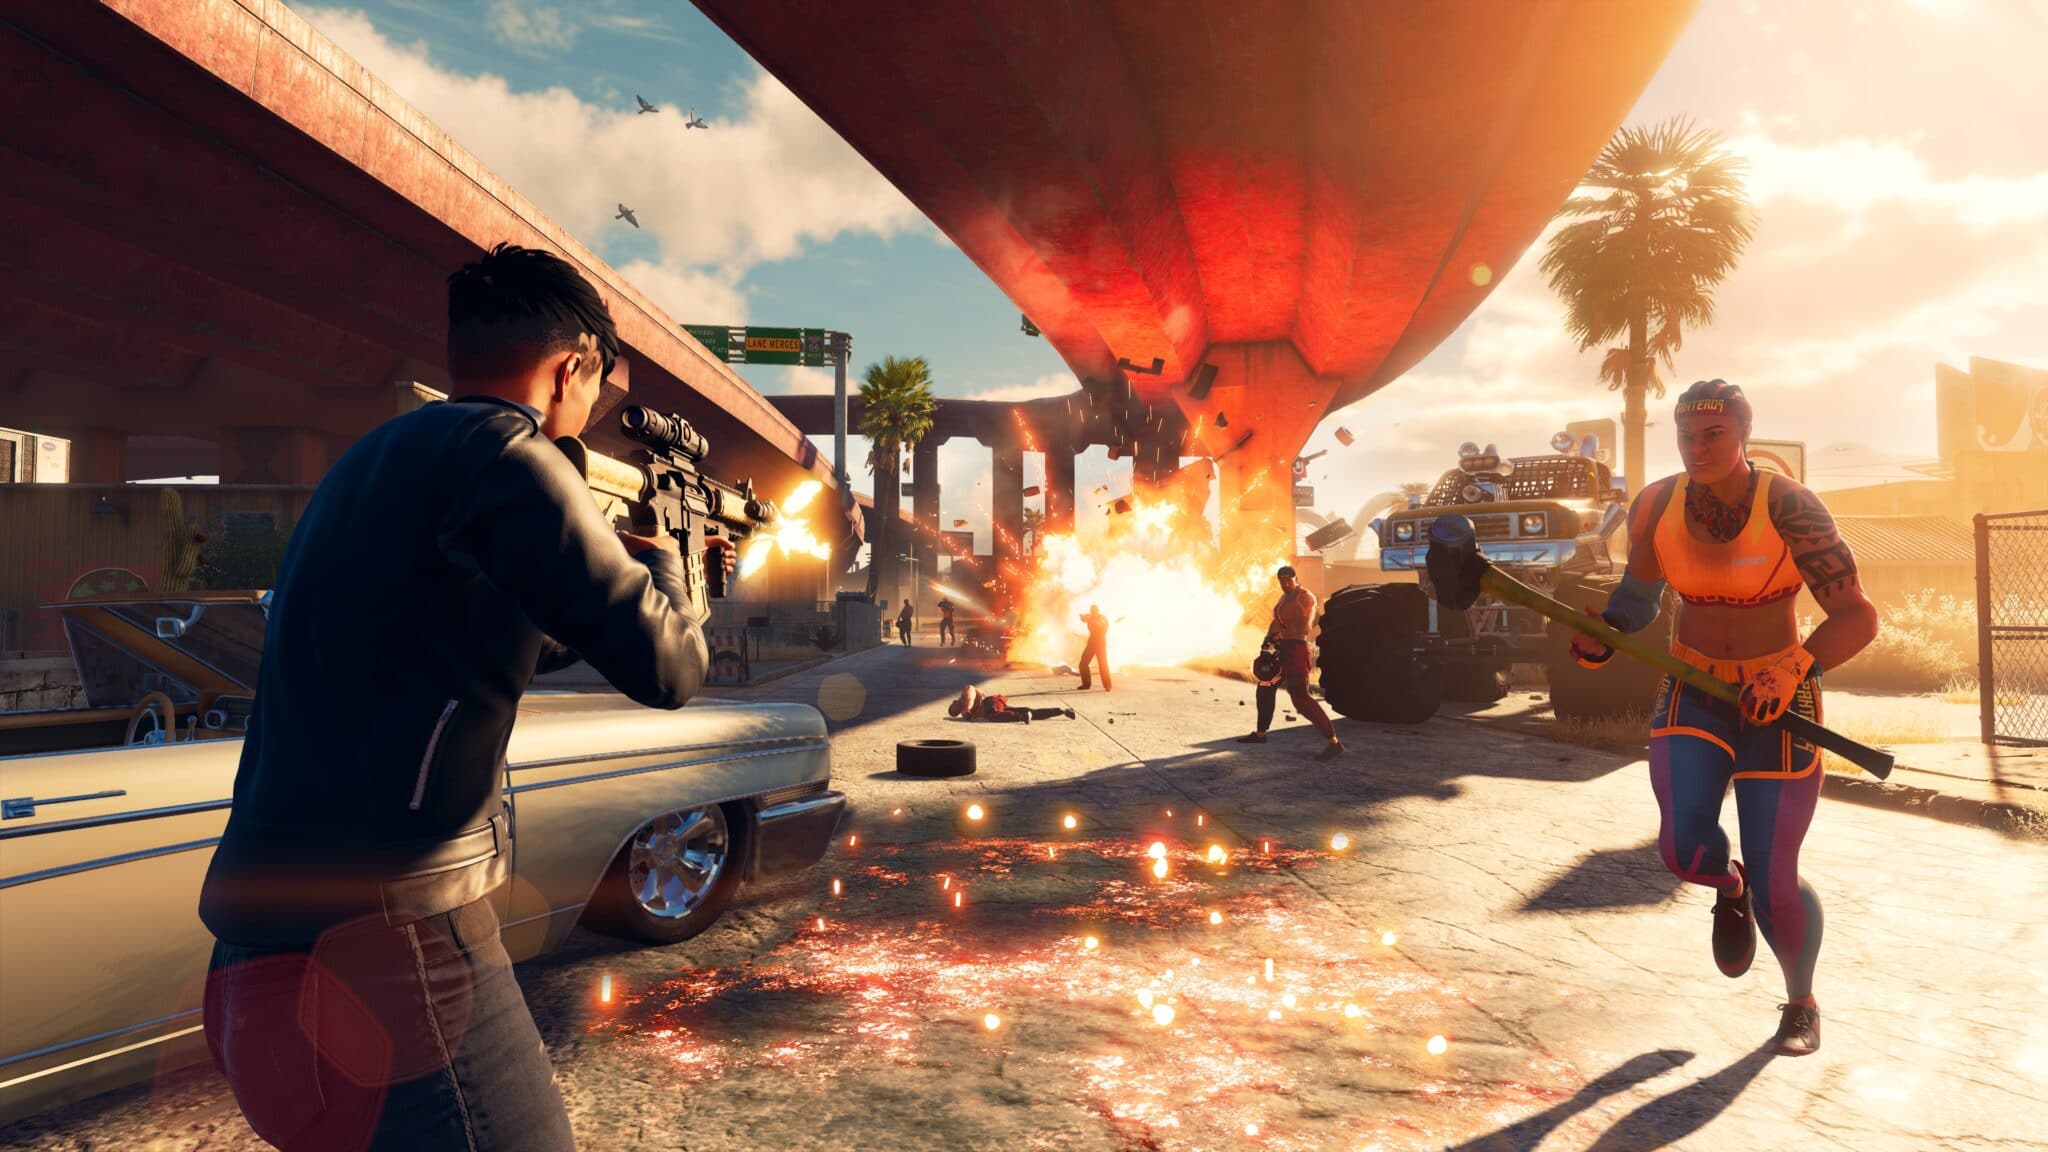 A bit of shooting, a bit of driving: Saints Row feels like any other open world game.